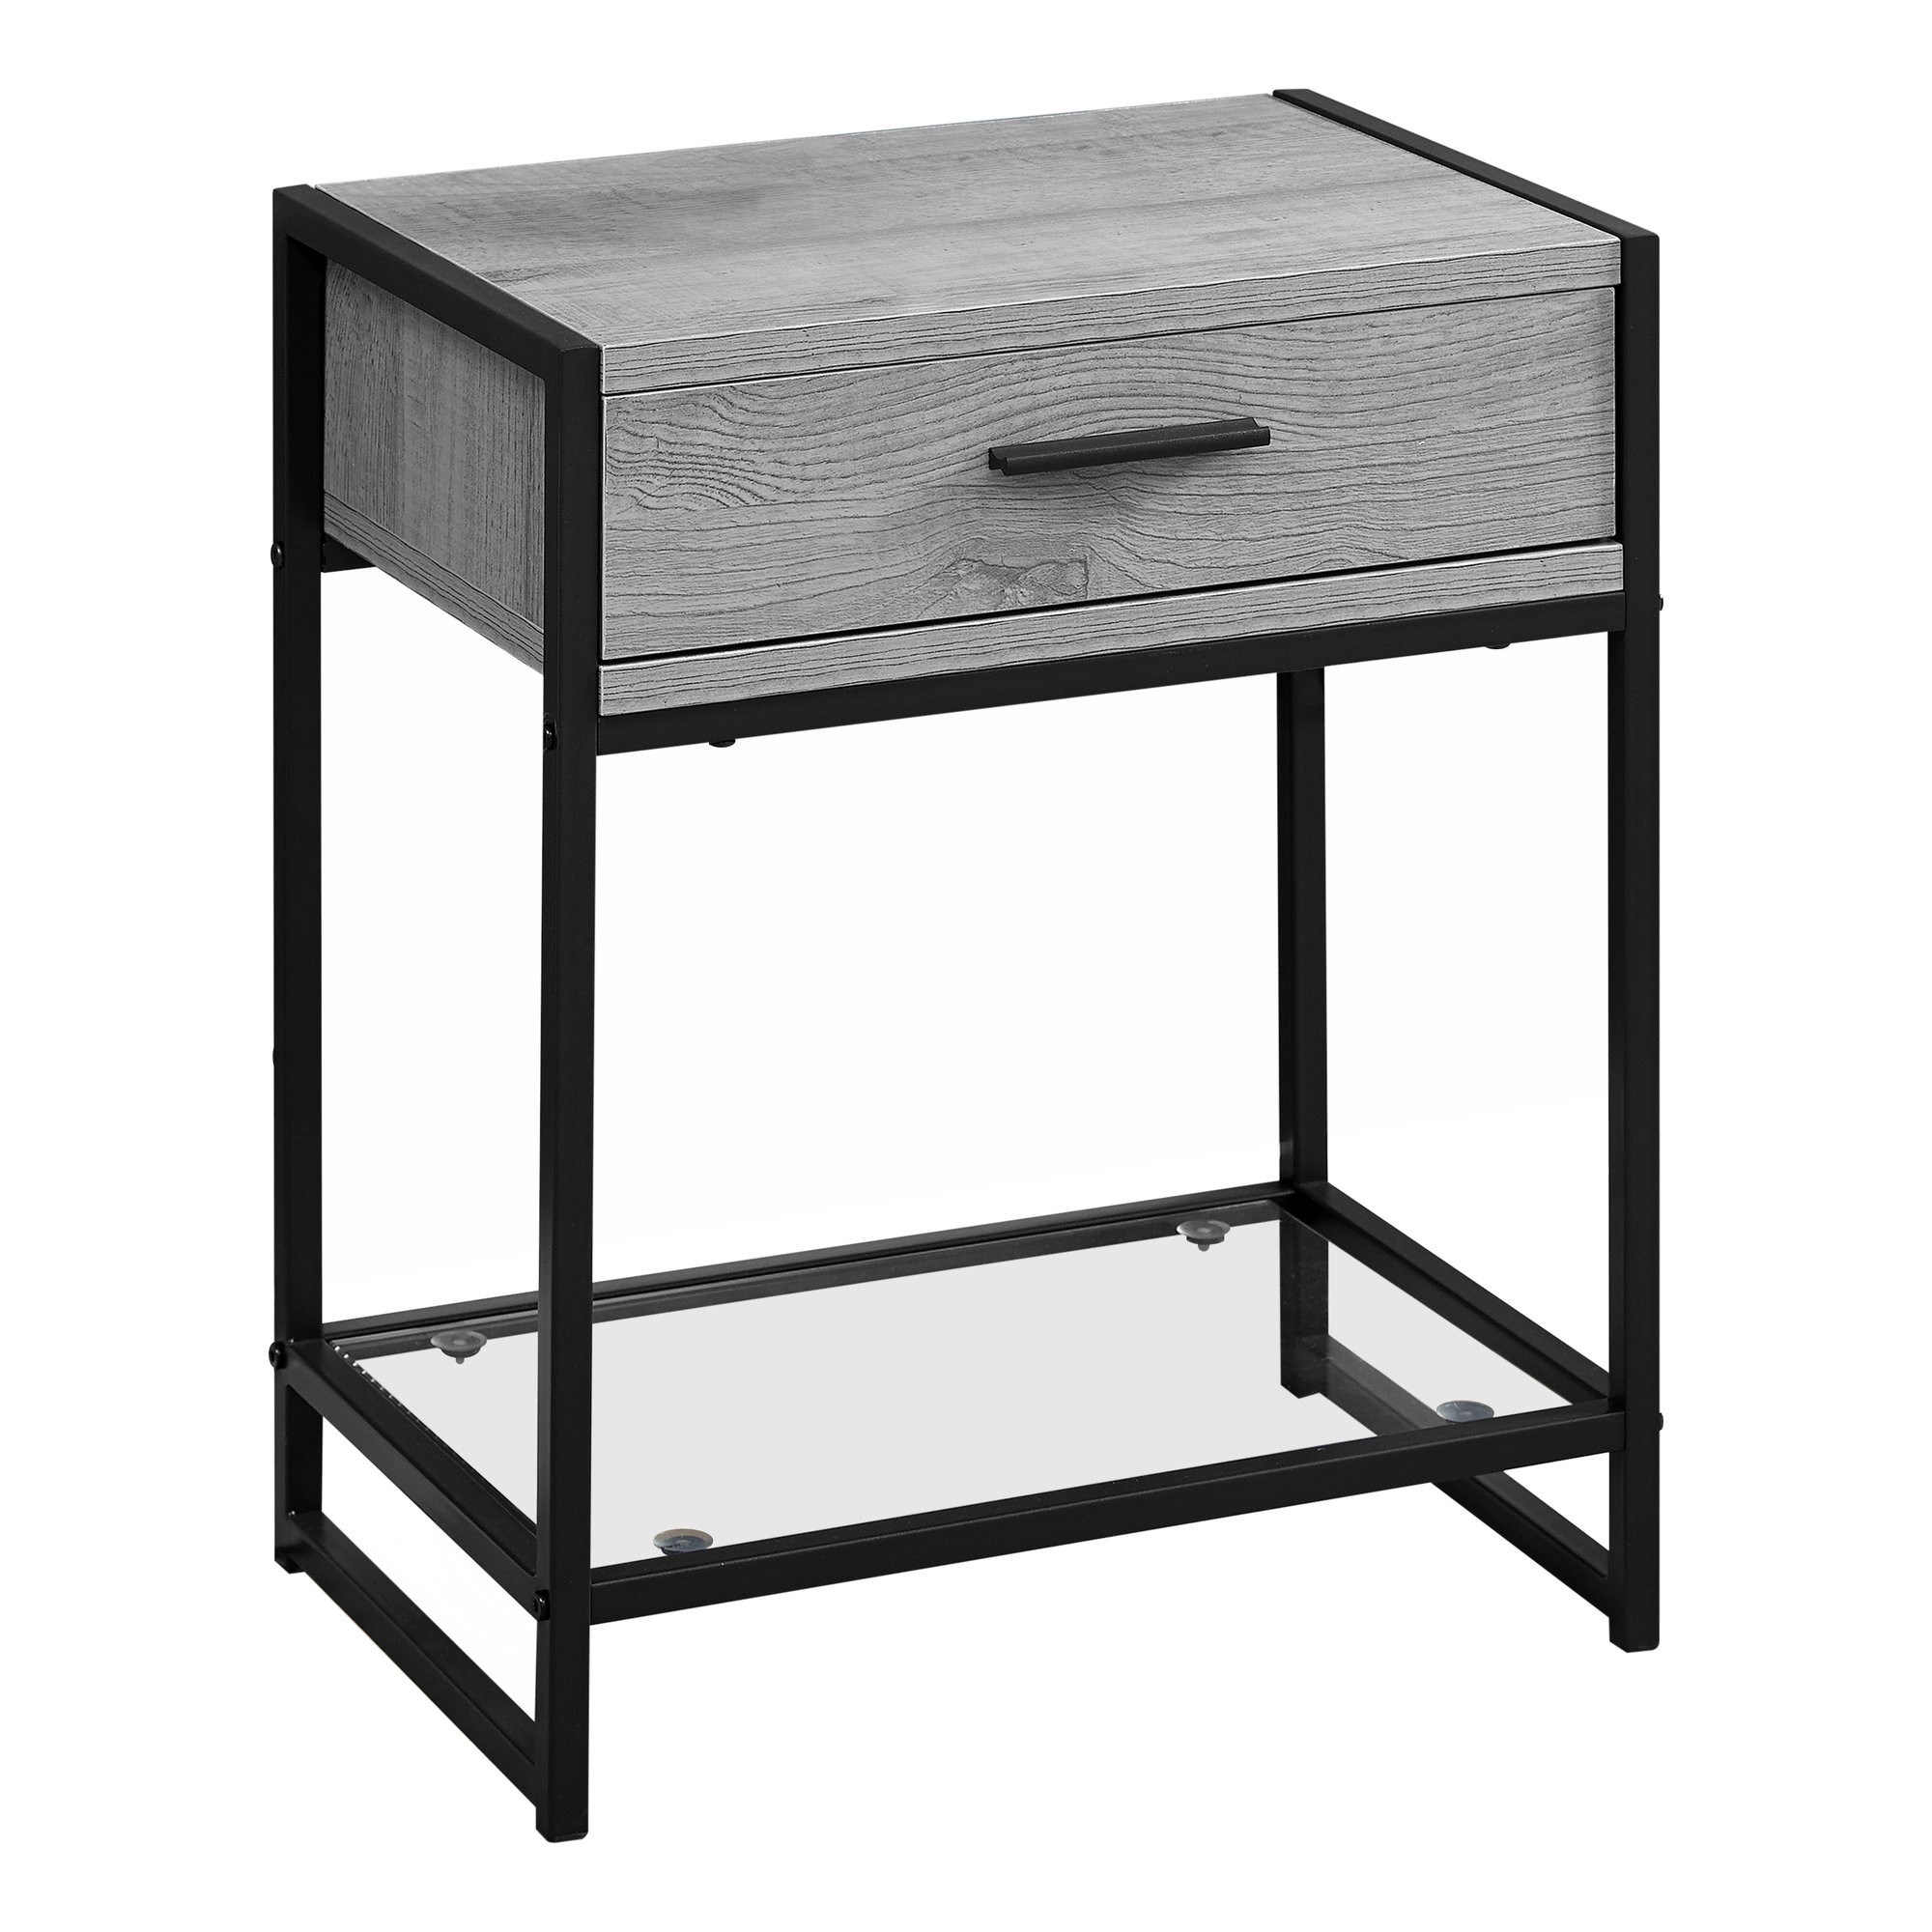 ACCENT TABLE - 22"H / GREY / BLACK METAL / TEMPERED GLASS